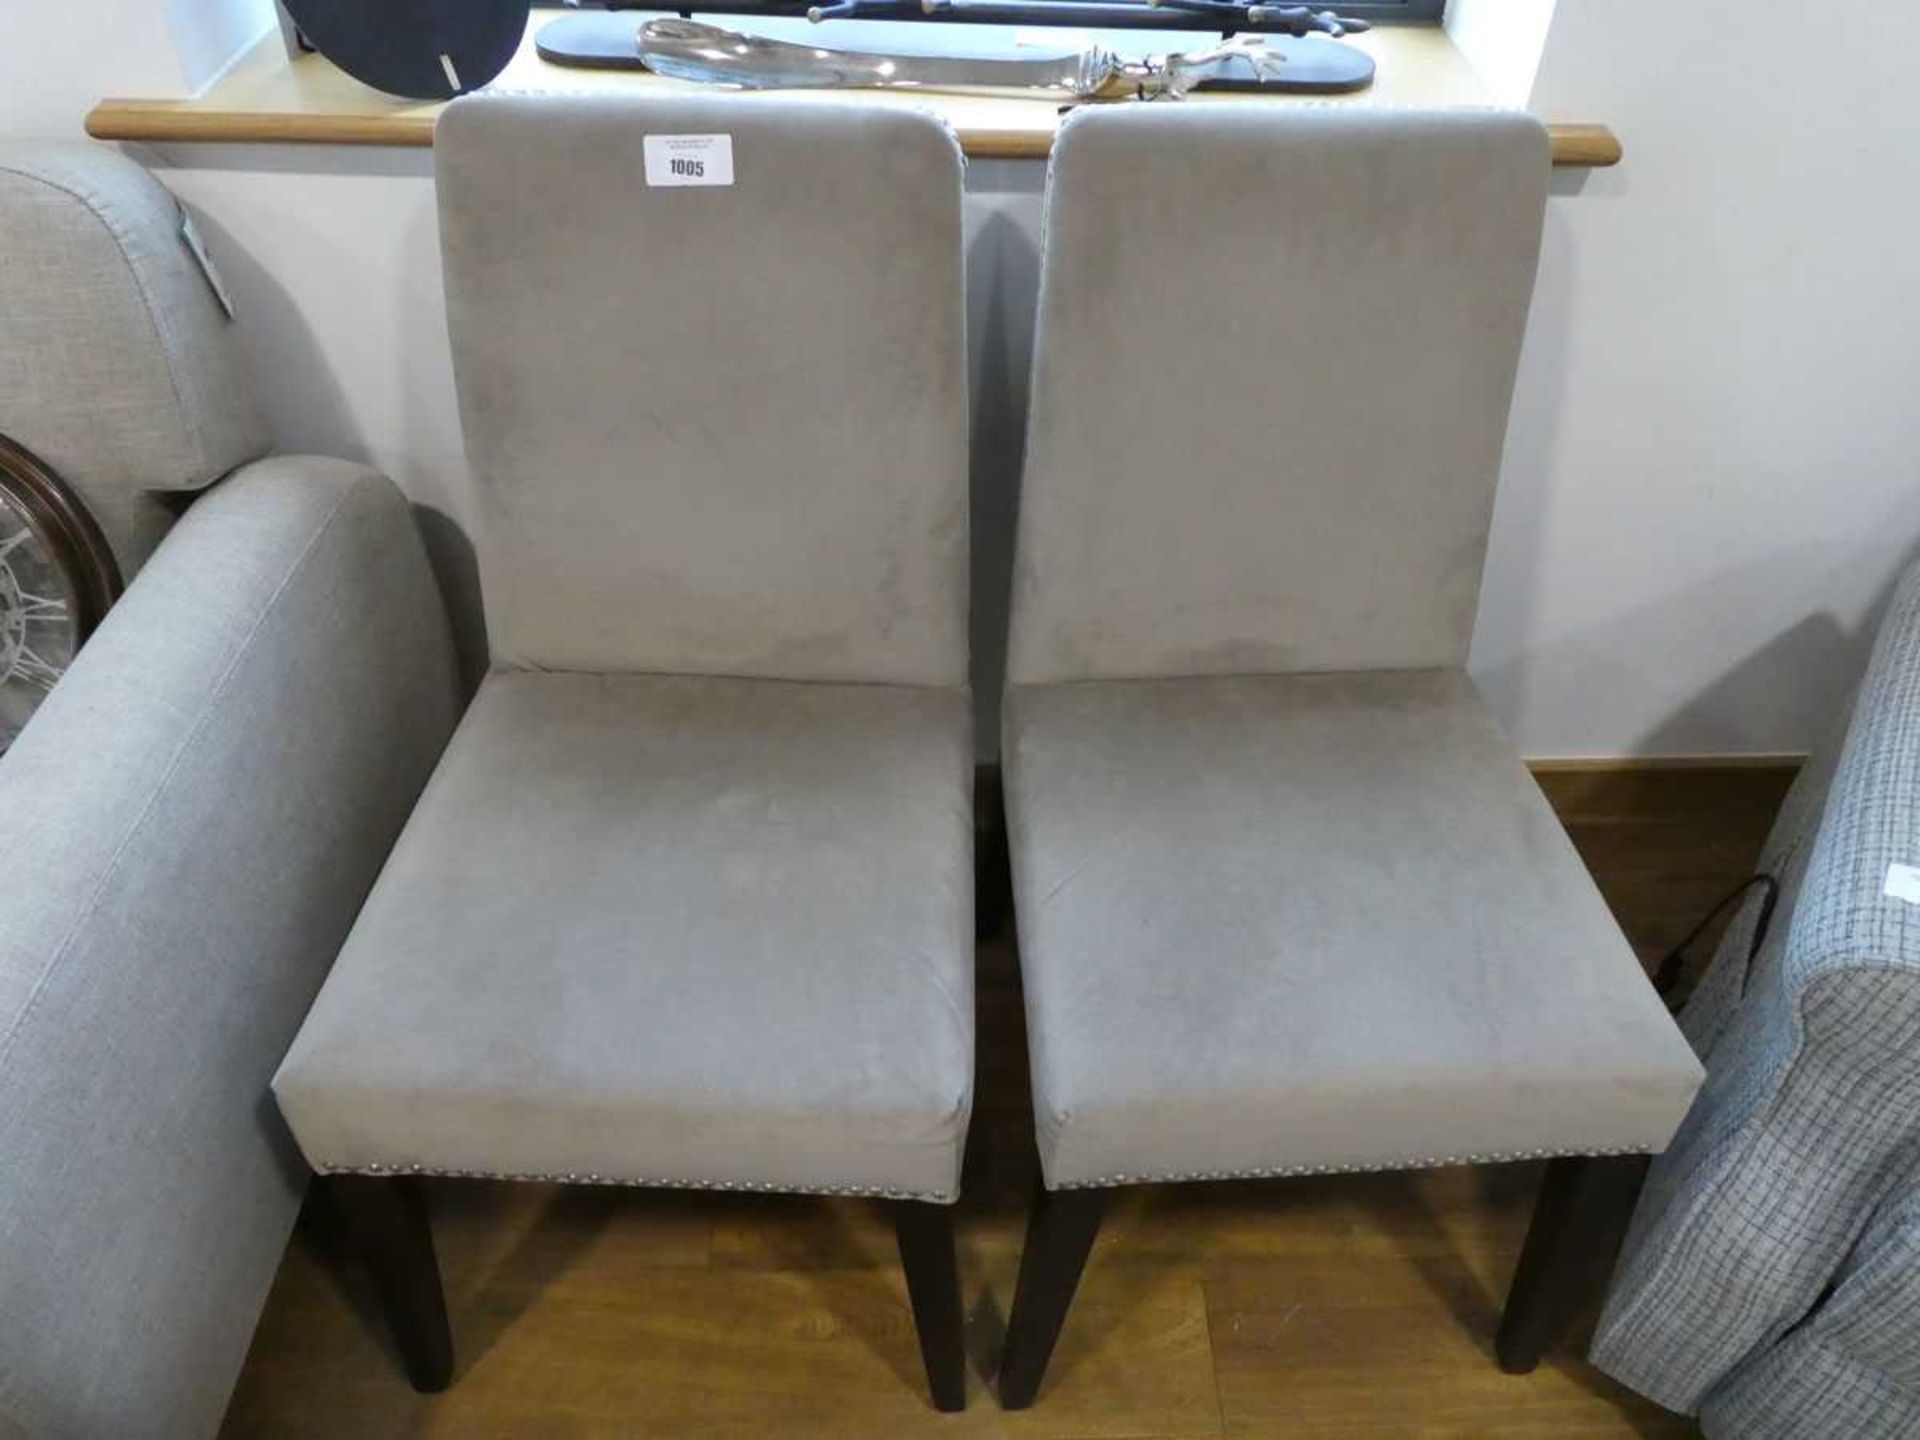 +VAT Pair of grey and black stud edged dining chairs